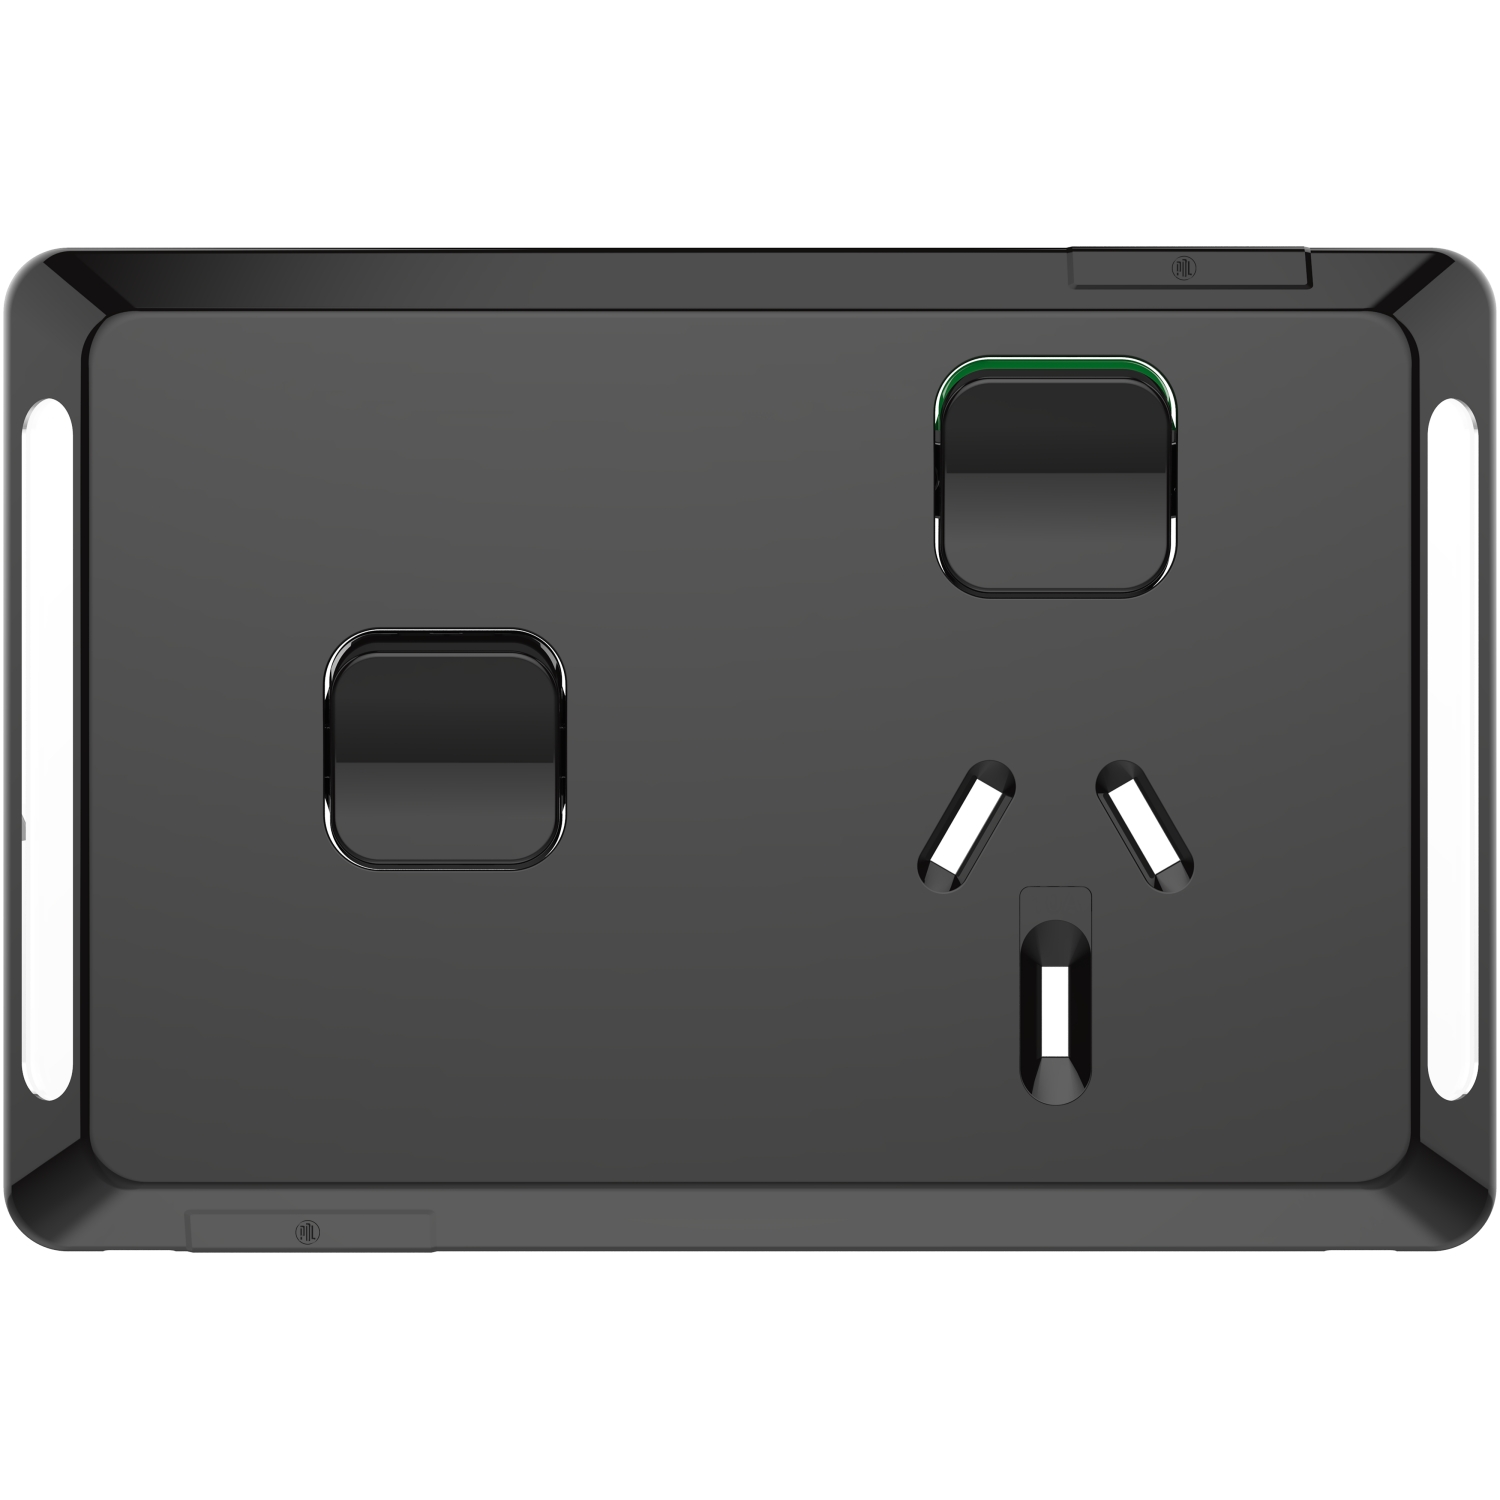 PDL Pro Series - Cover Plate Switched Socket 10A + Switch Horizontal - Black